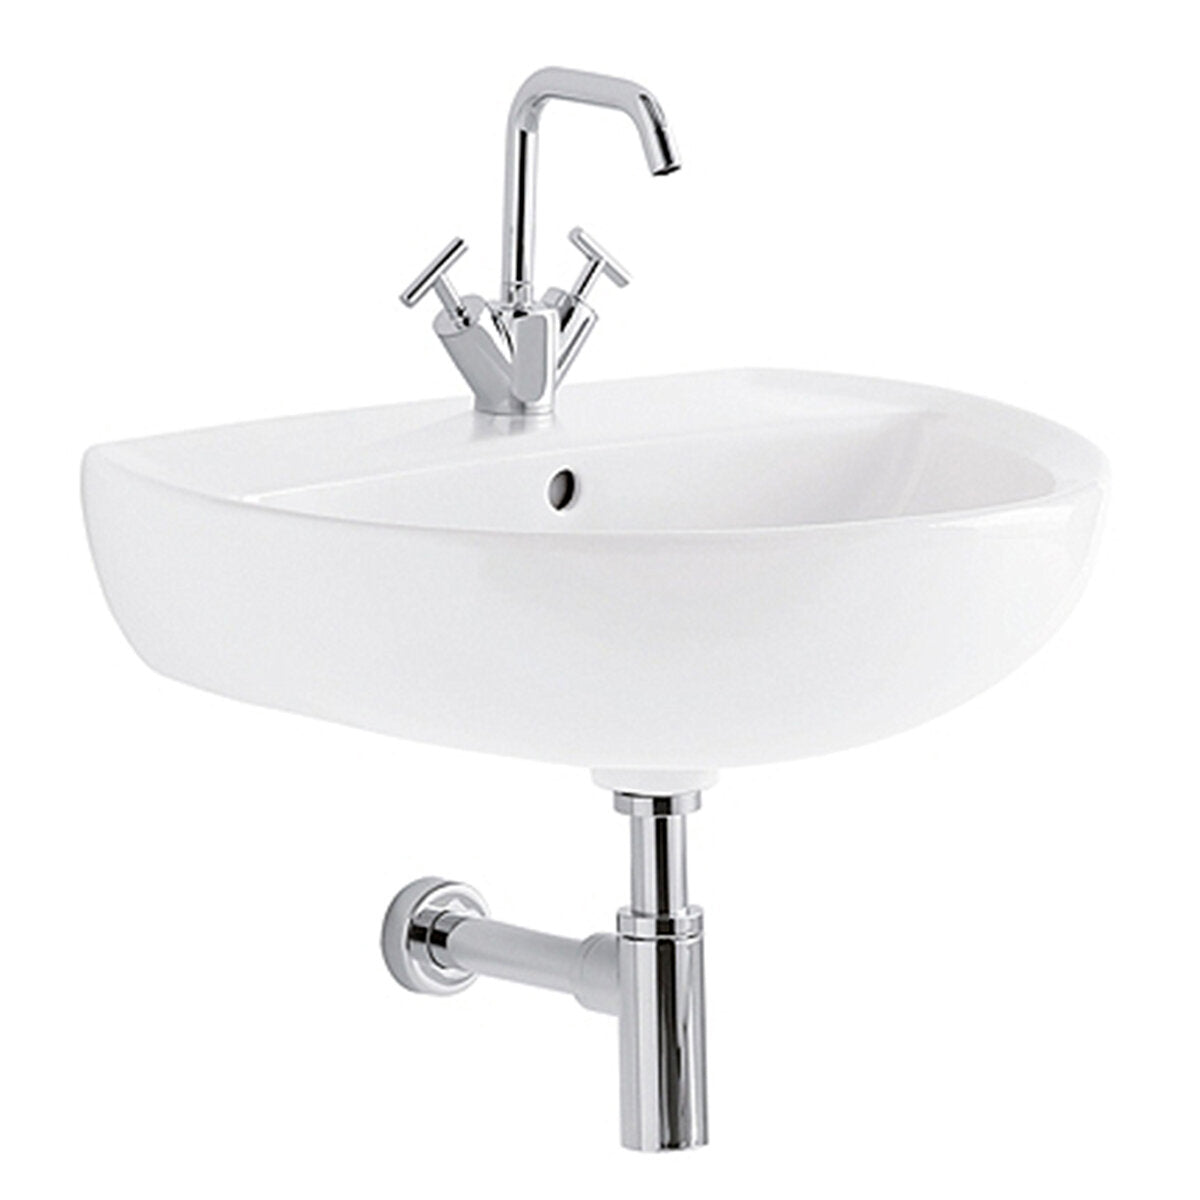 Geberit Colibrì 65 cm single hole wall-mounted washbasin in glossy white